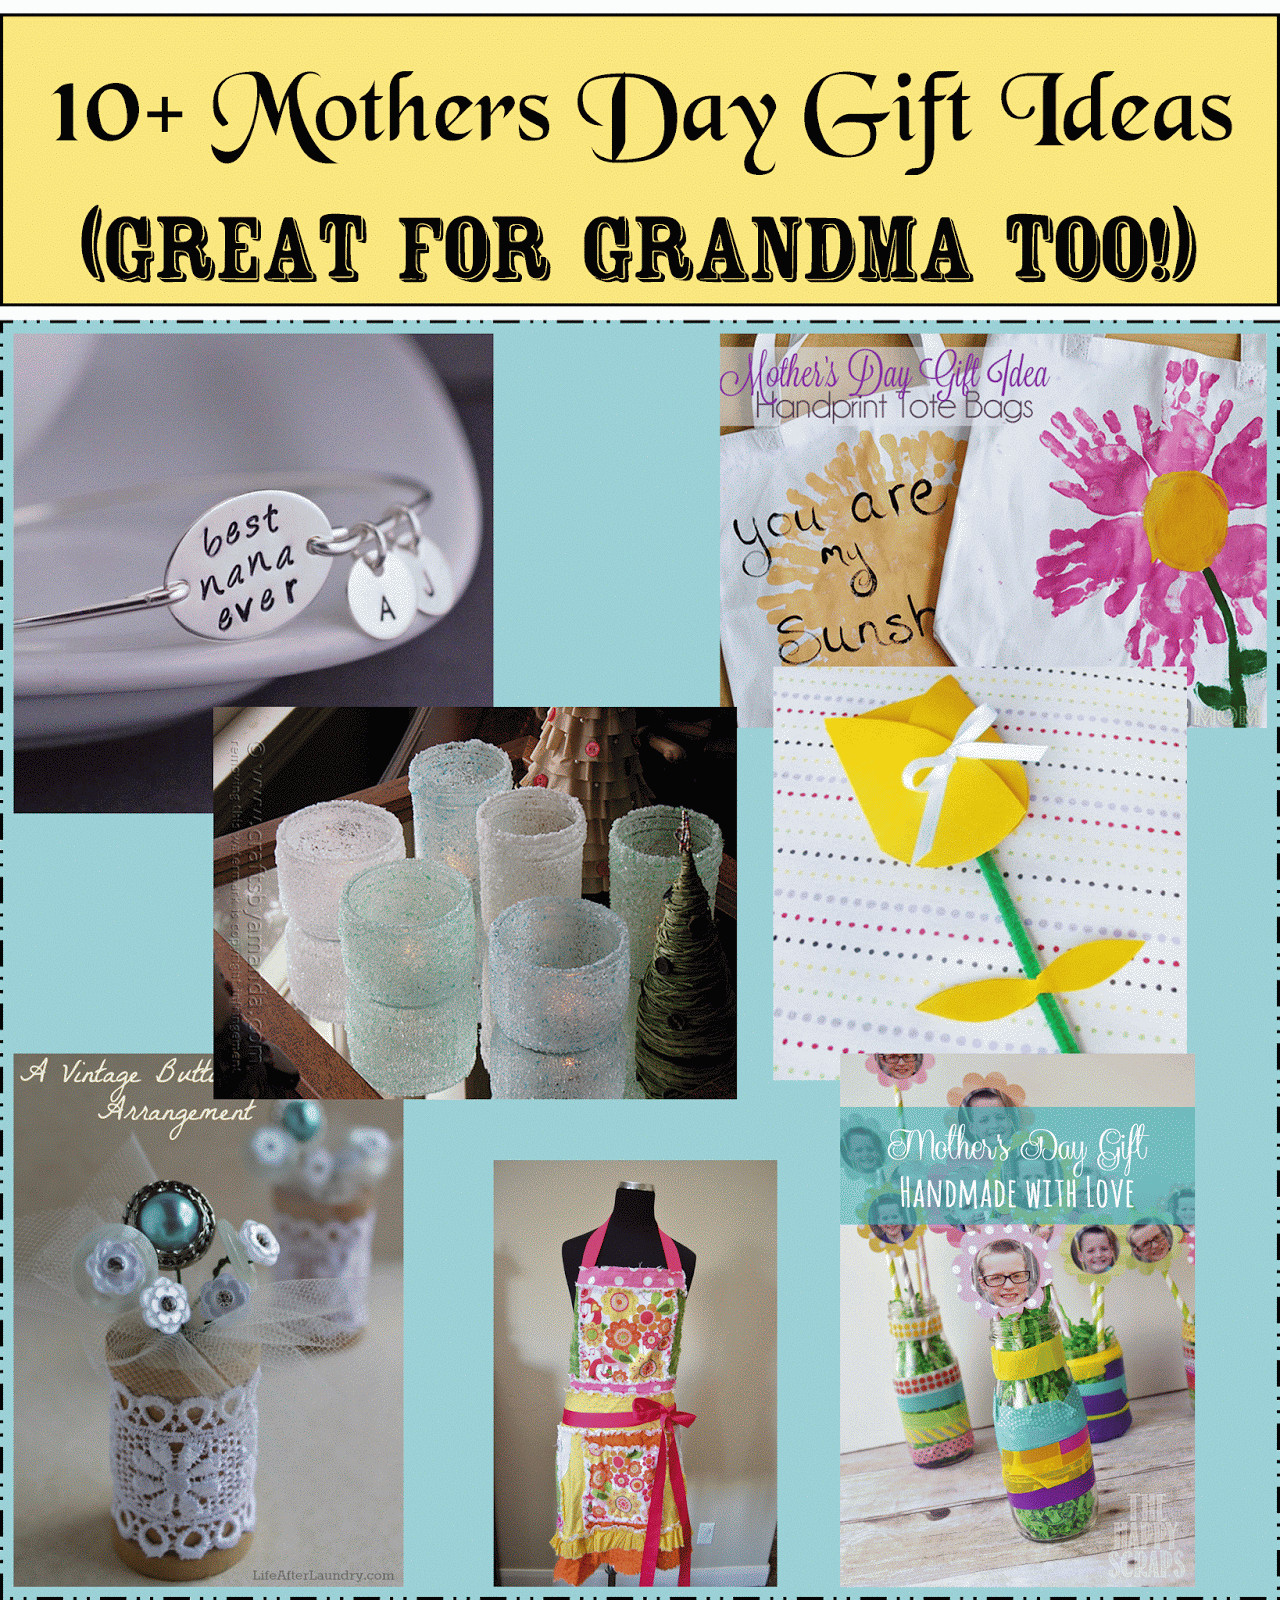 Great Grandmother Gift Ideas
 Mother Day Gifts Roundup Perfect for Grandma Too